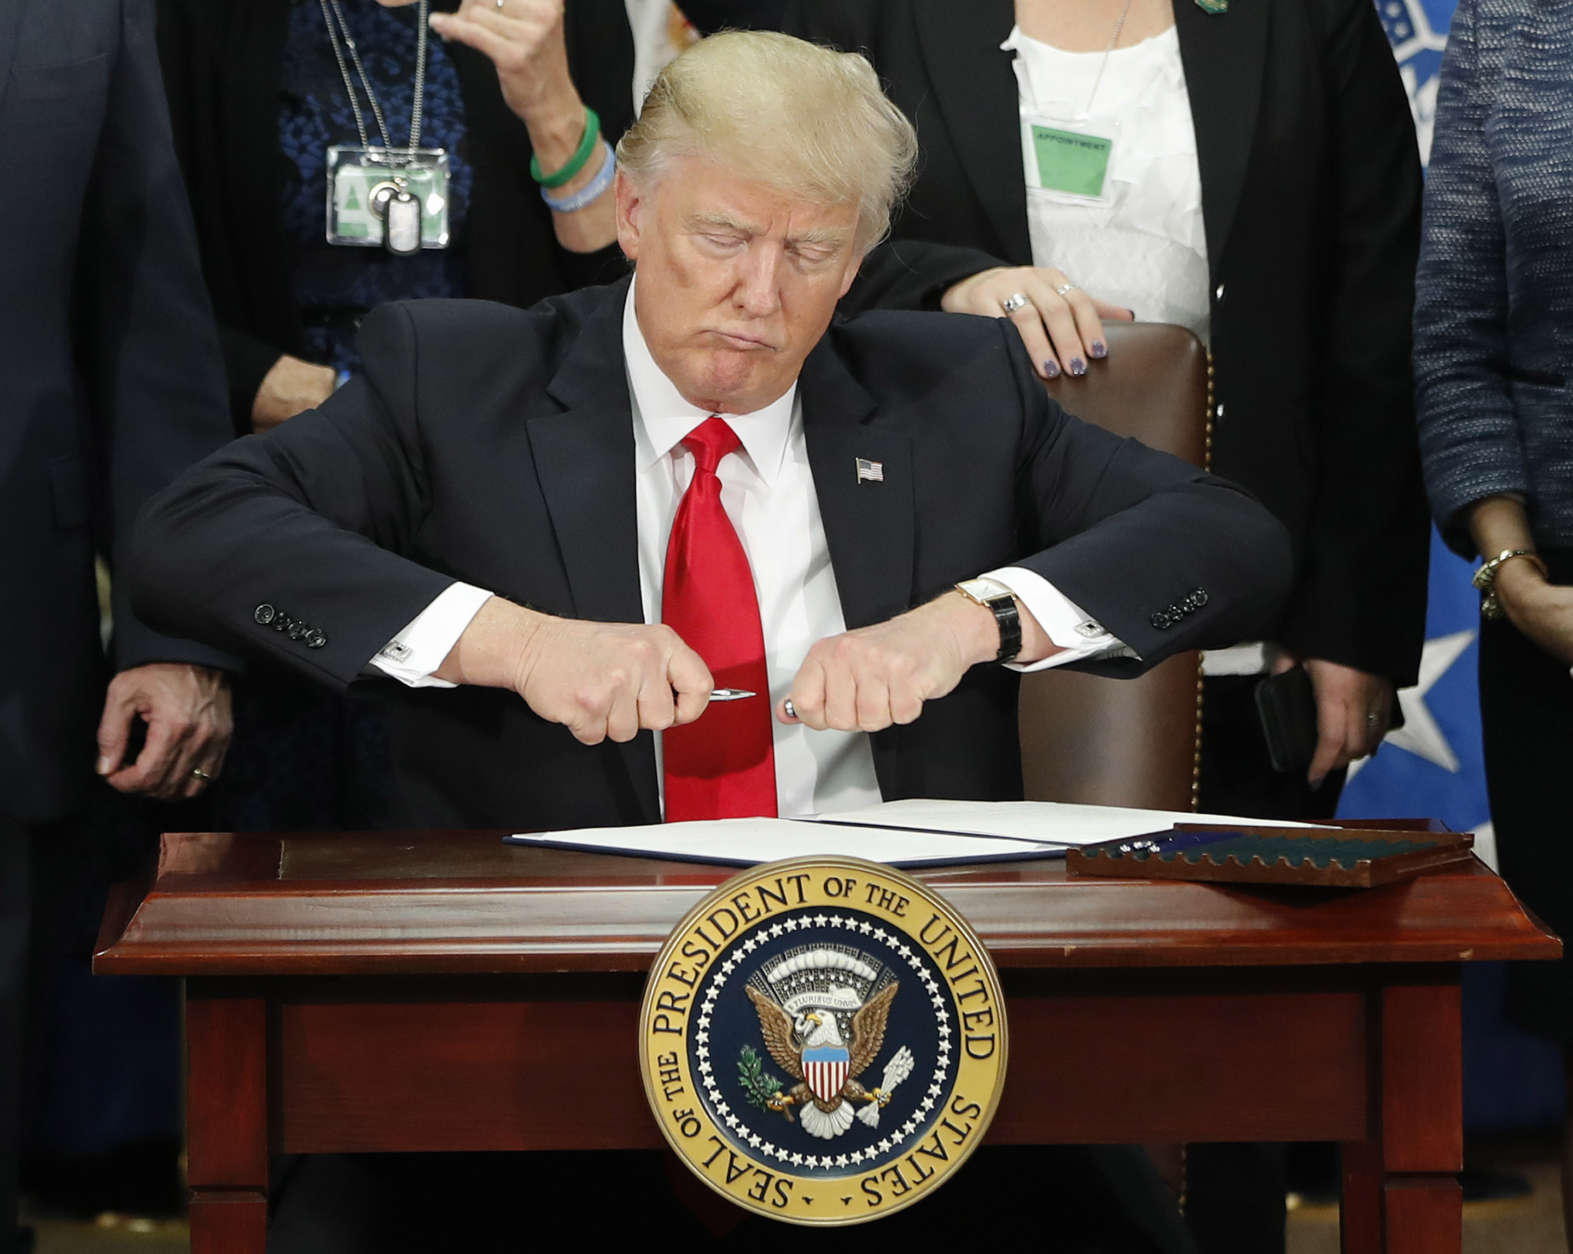 President Trump takes the cap off a pen before signing an executive order on building border wall during a visit to the Homeland Security Department on Jan. 25. (AP photo/Pablo Martinez Monsivais)